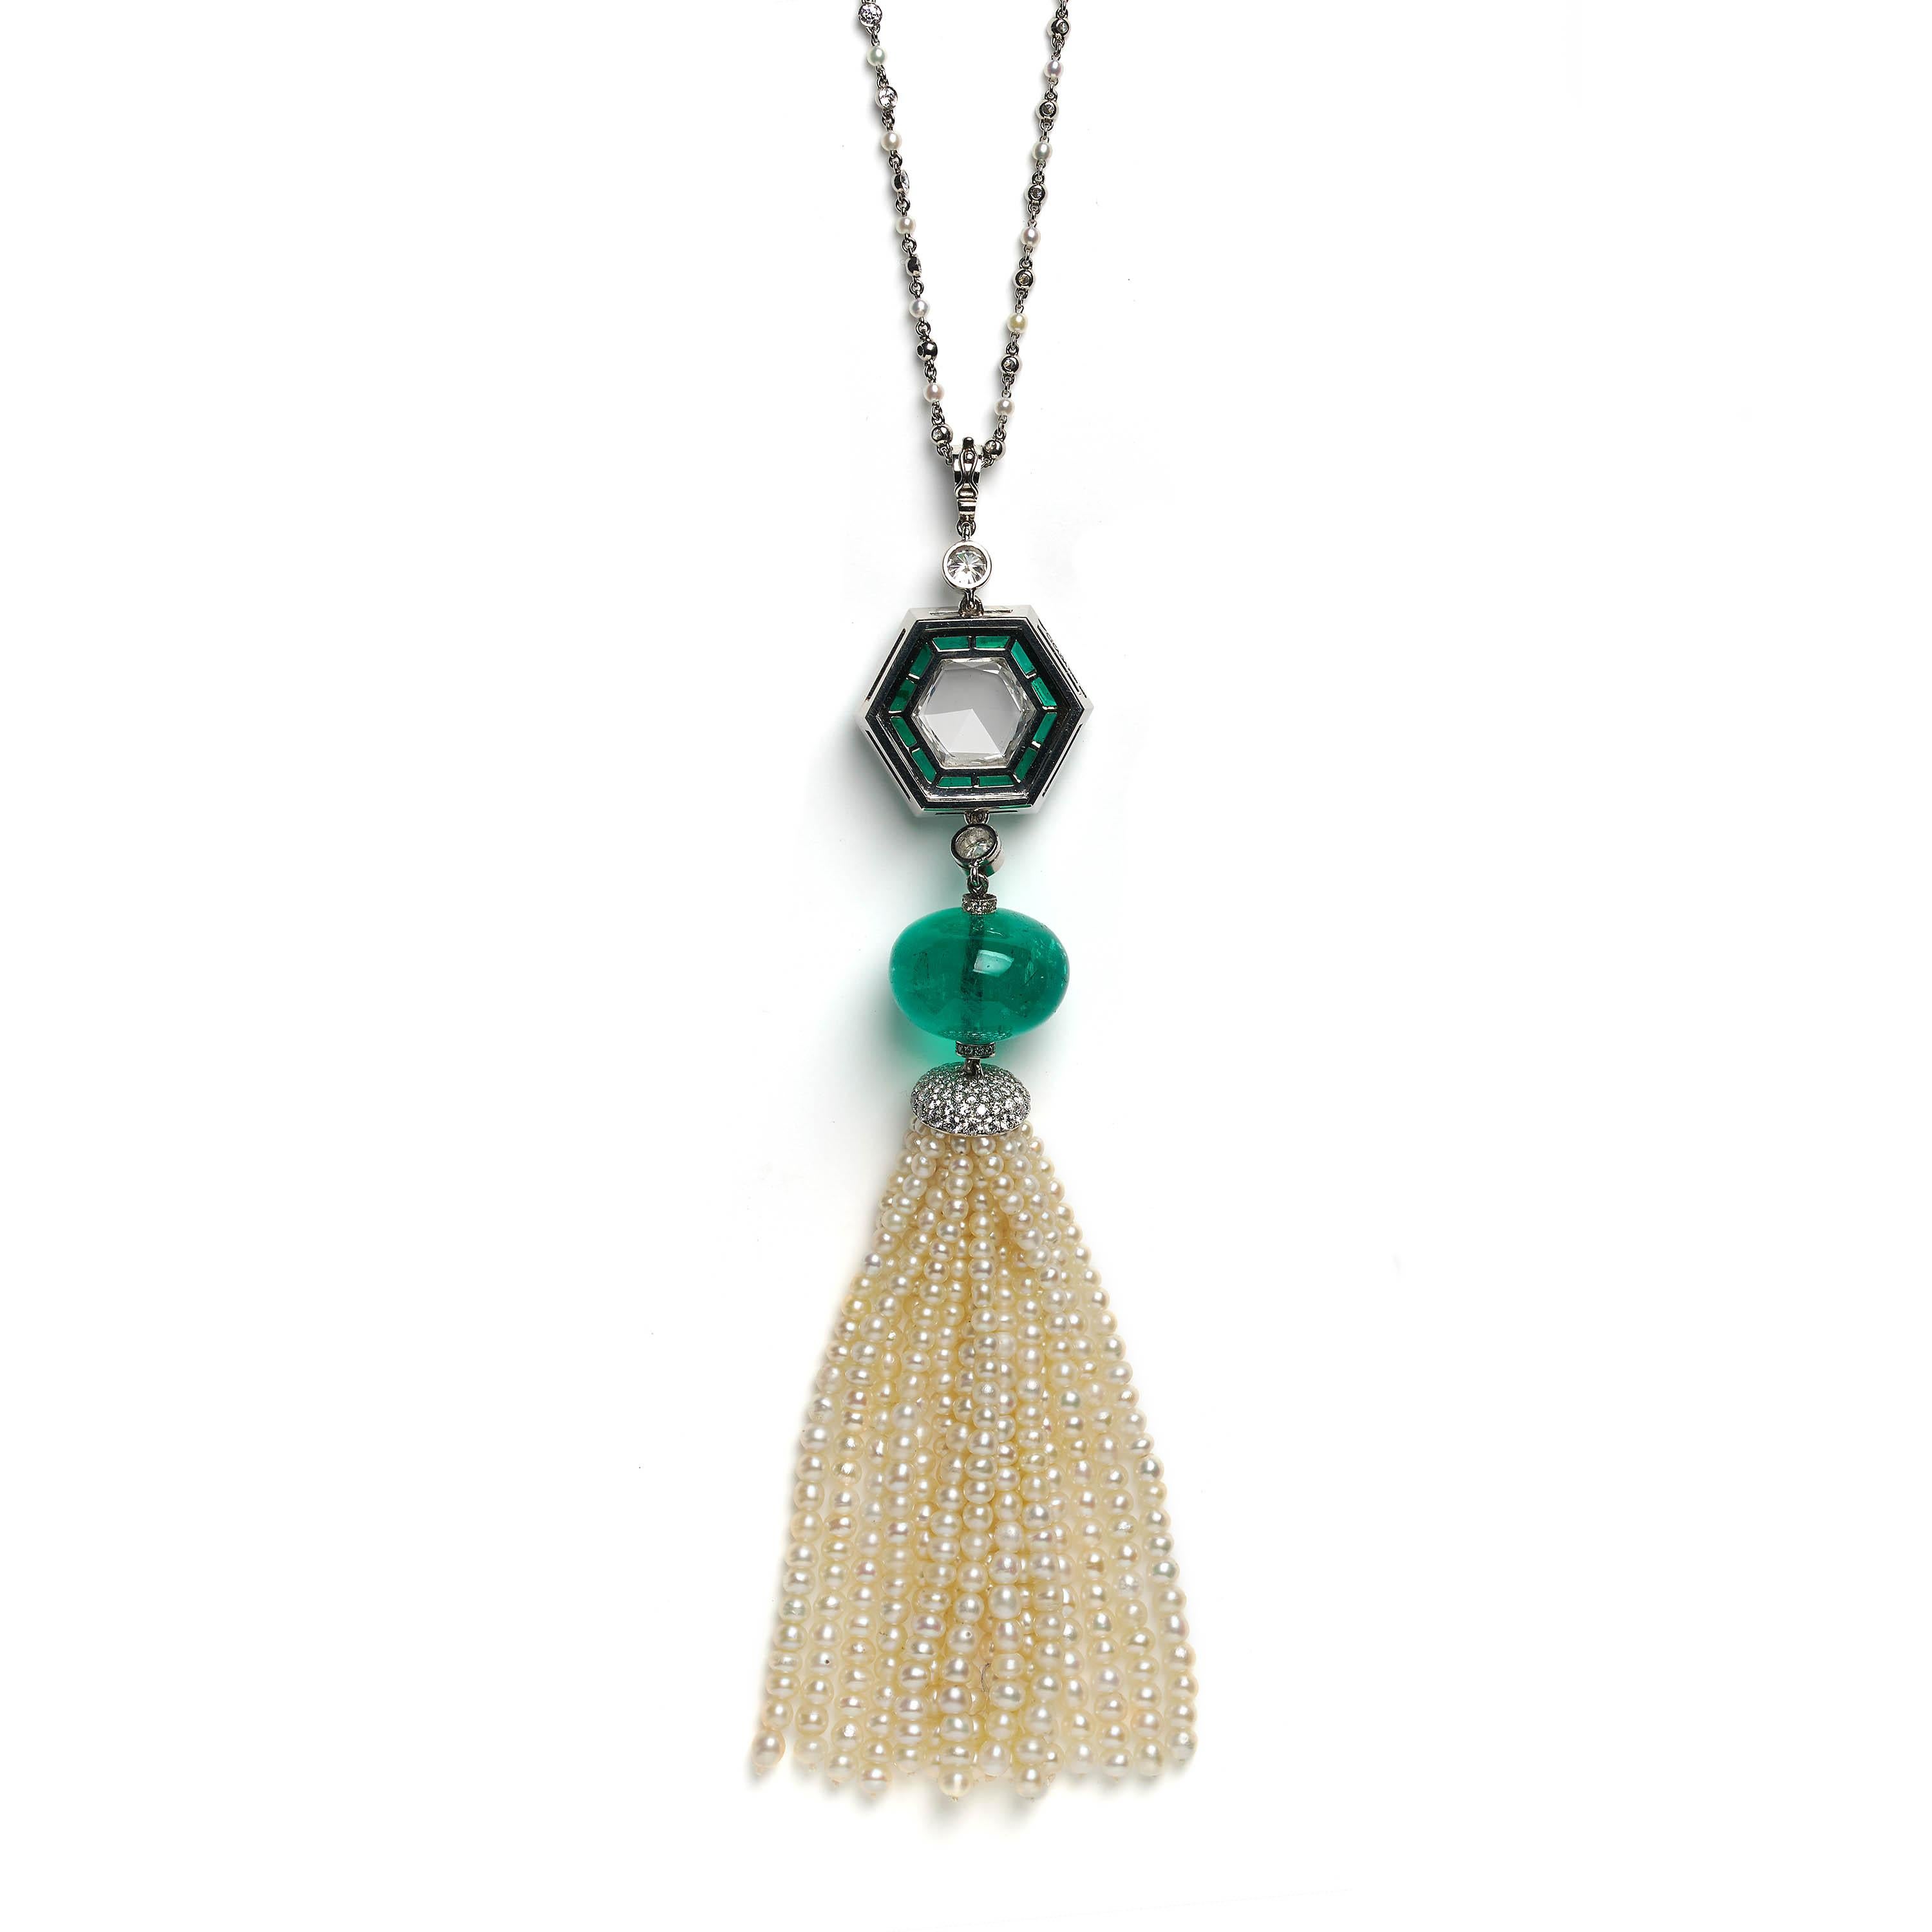 A modern drop pendant necklace, consisting of a fringed tassel made up of an estimated 69.20 carats of white pearls, with a brilliant-cut diamond set cap, suspended by a polished emerald bead weighing an estimated 28.81 carats, above which is a